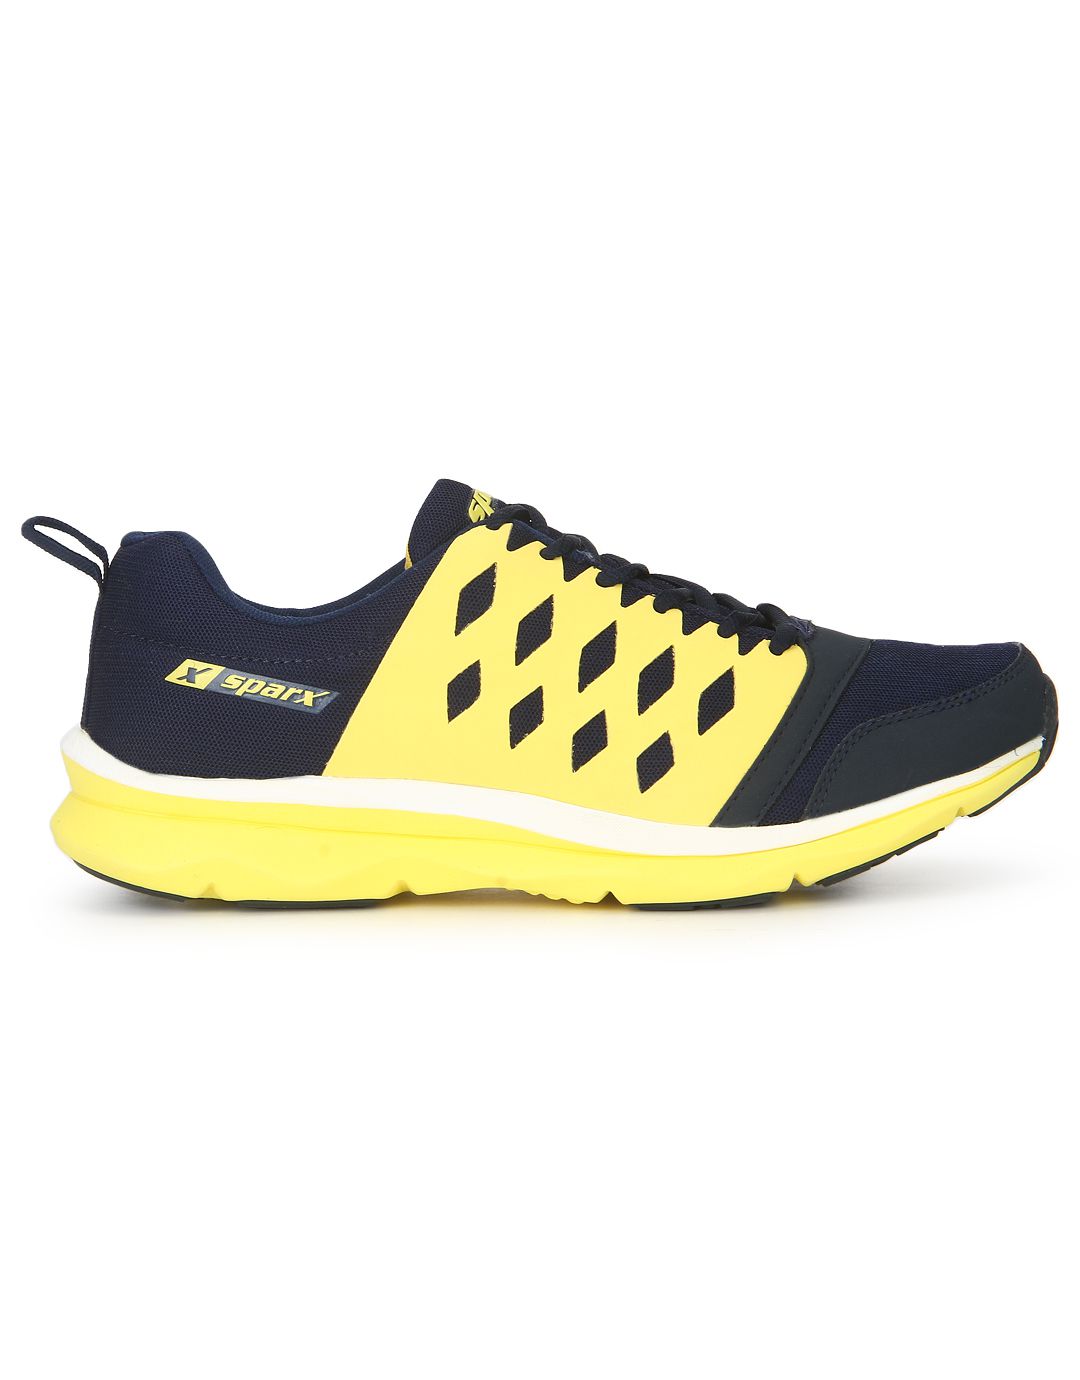 Sparx SM-221 Navy Running Shoes - Buy 